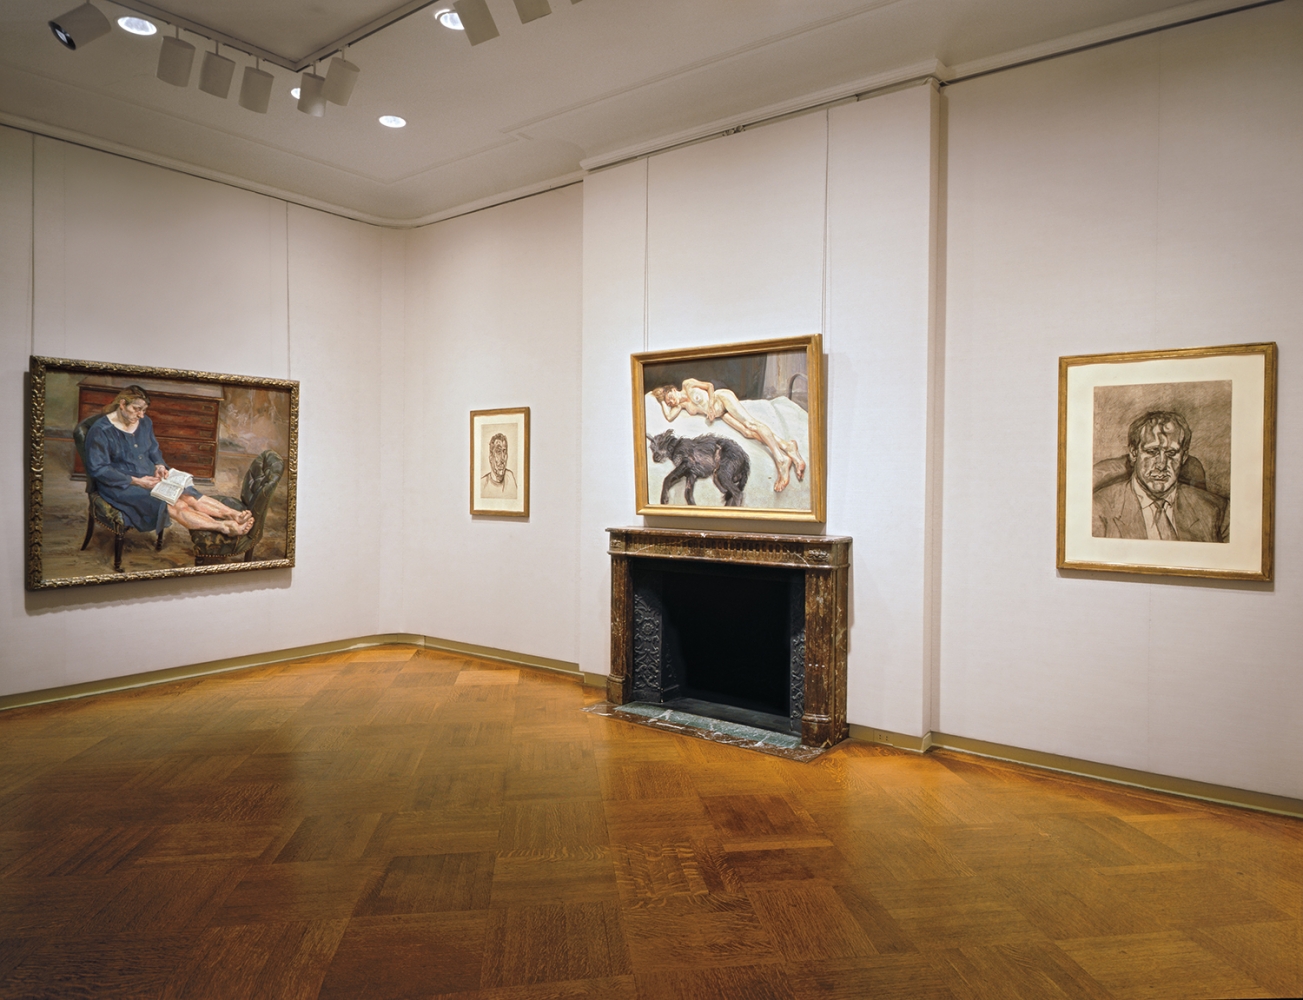 Installation view of Lucian Freud: Recent Work, April 10 - May 19, 2000. Art © The Lucian Freud Archive / Bridgeman Images.